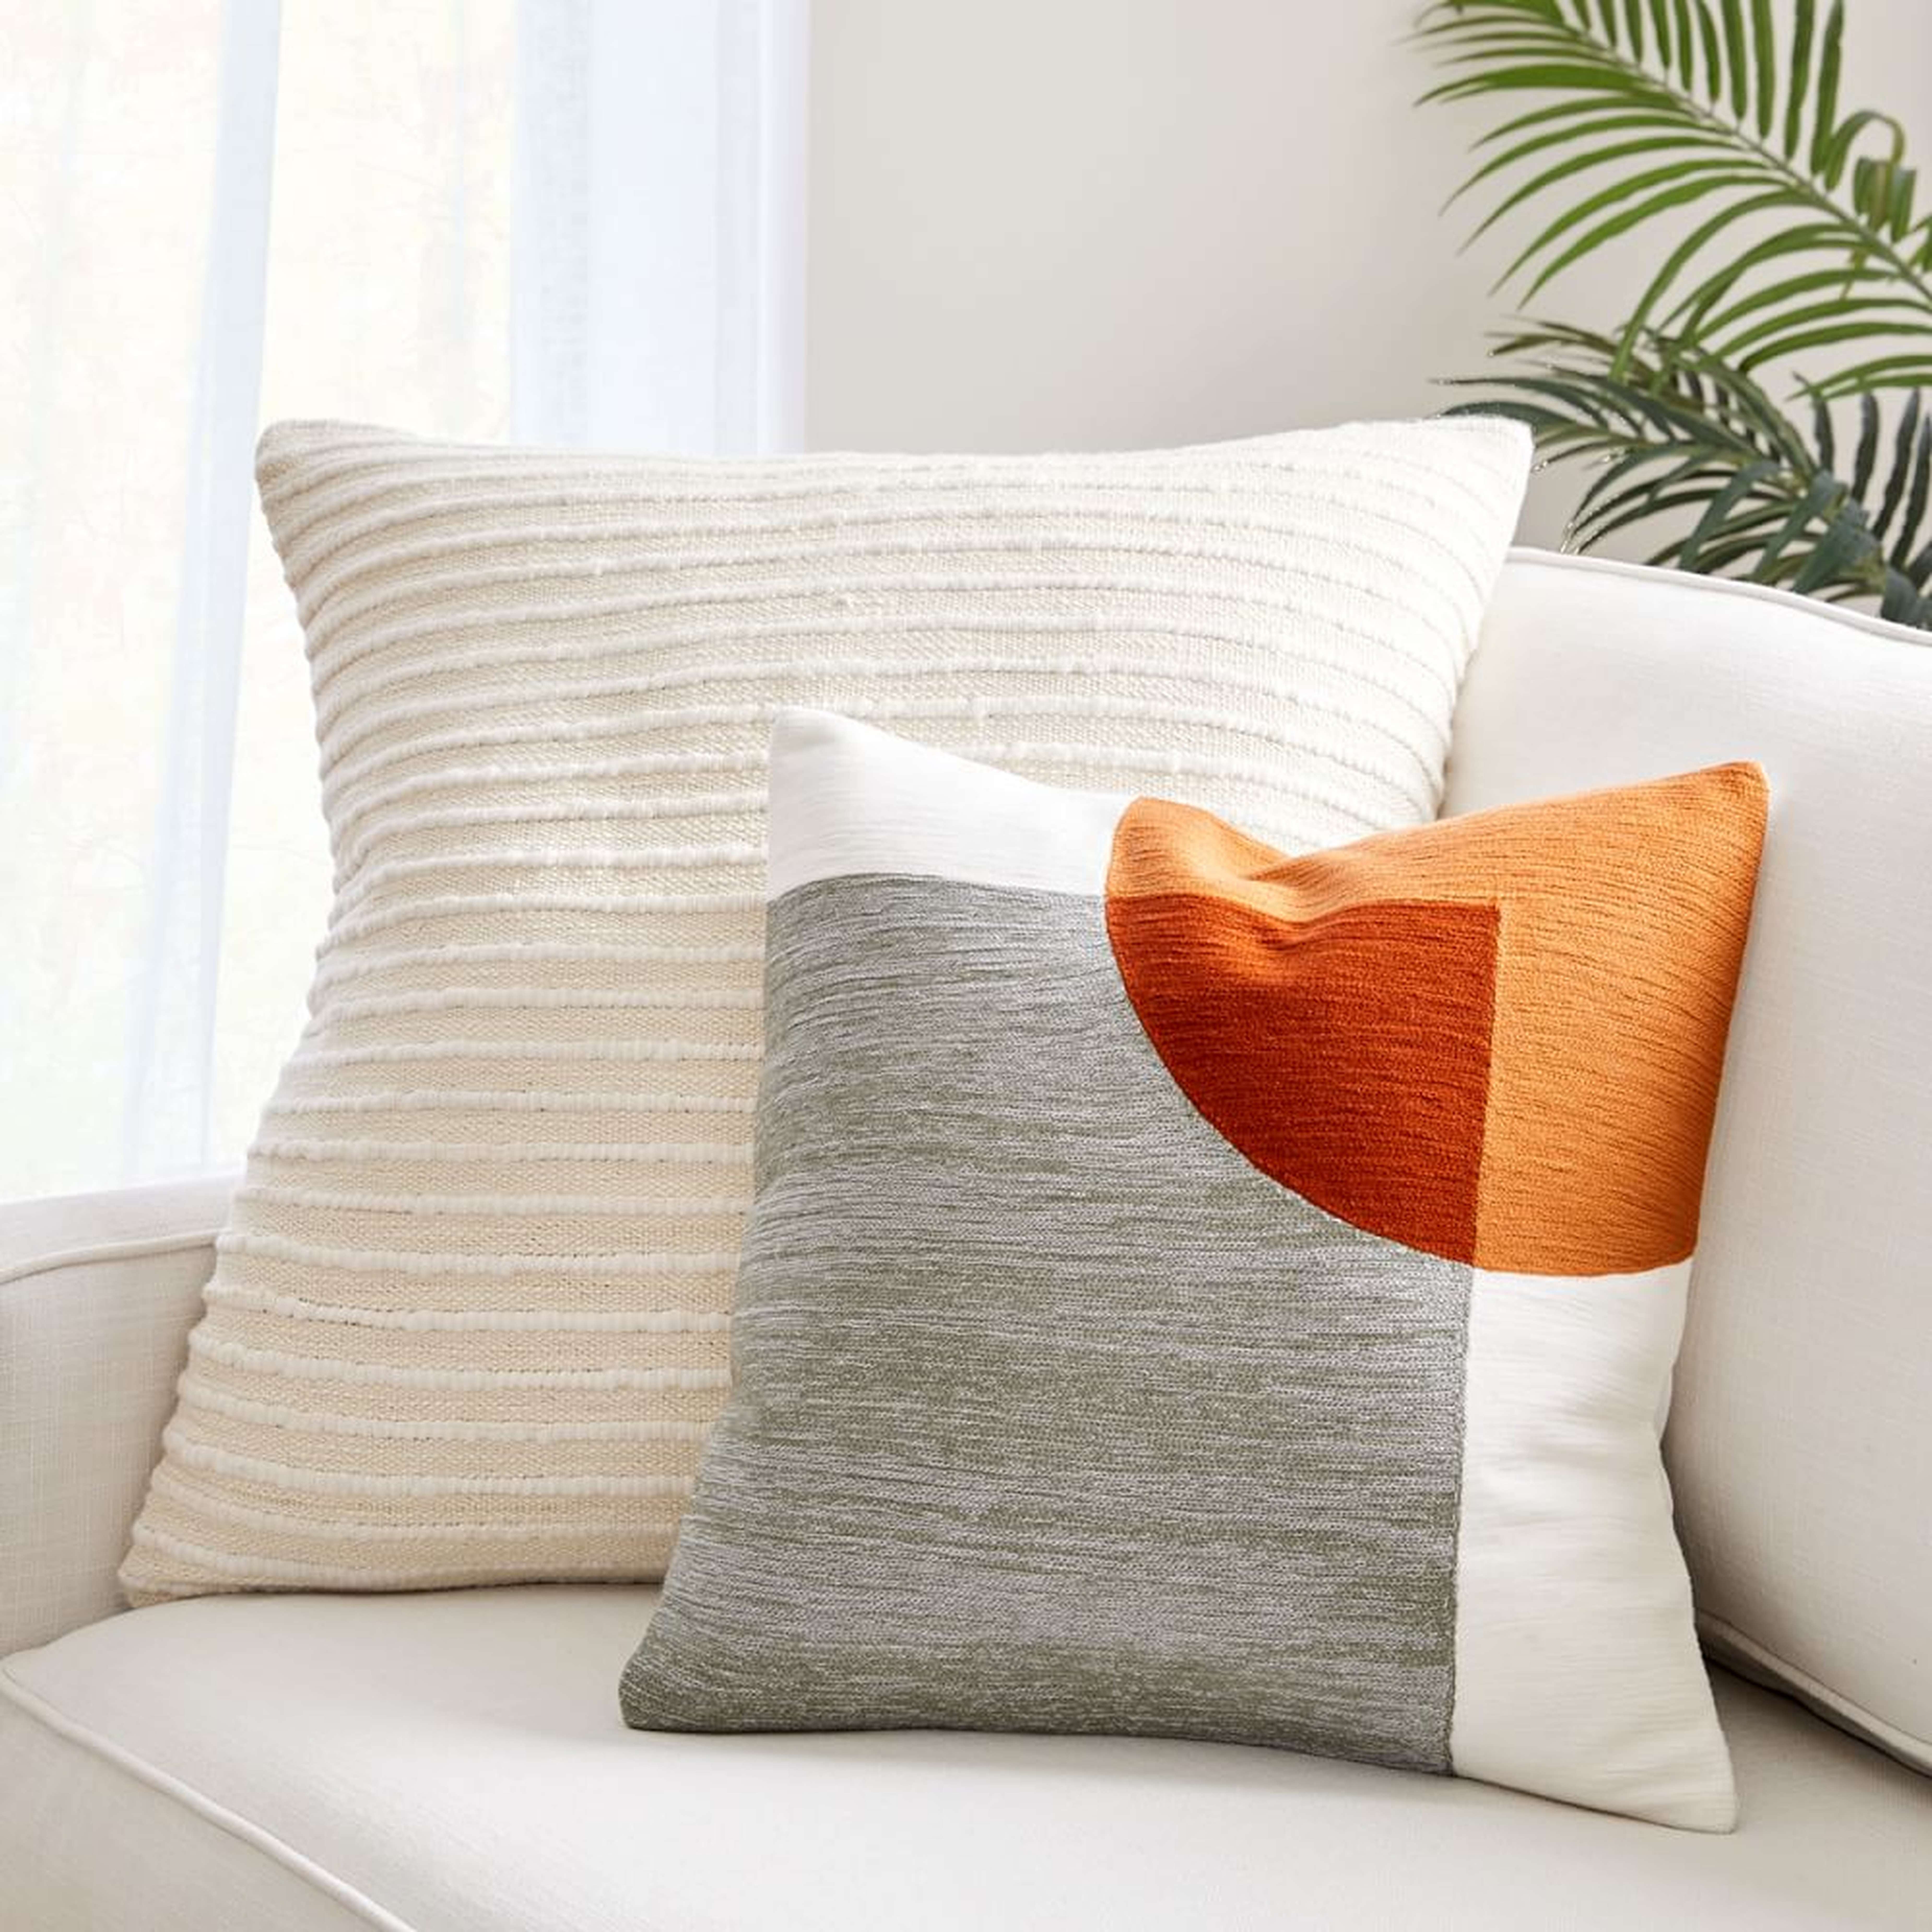 Crewel Overlapping Shapes & Soft Corded Pillow Set, Set Of 2 - West Elm